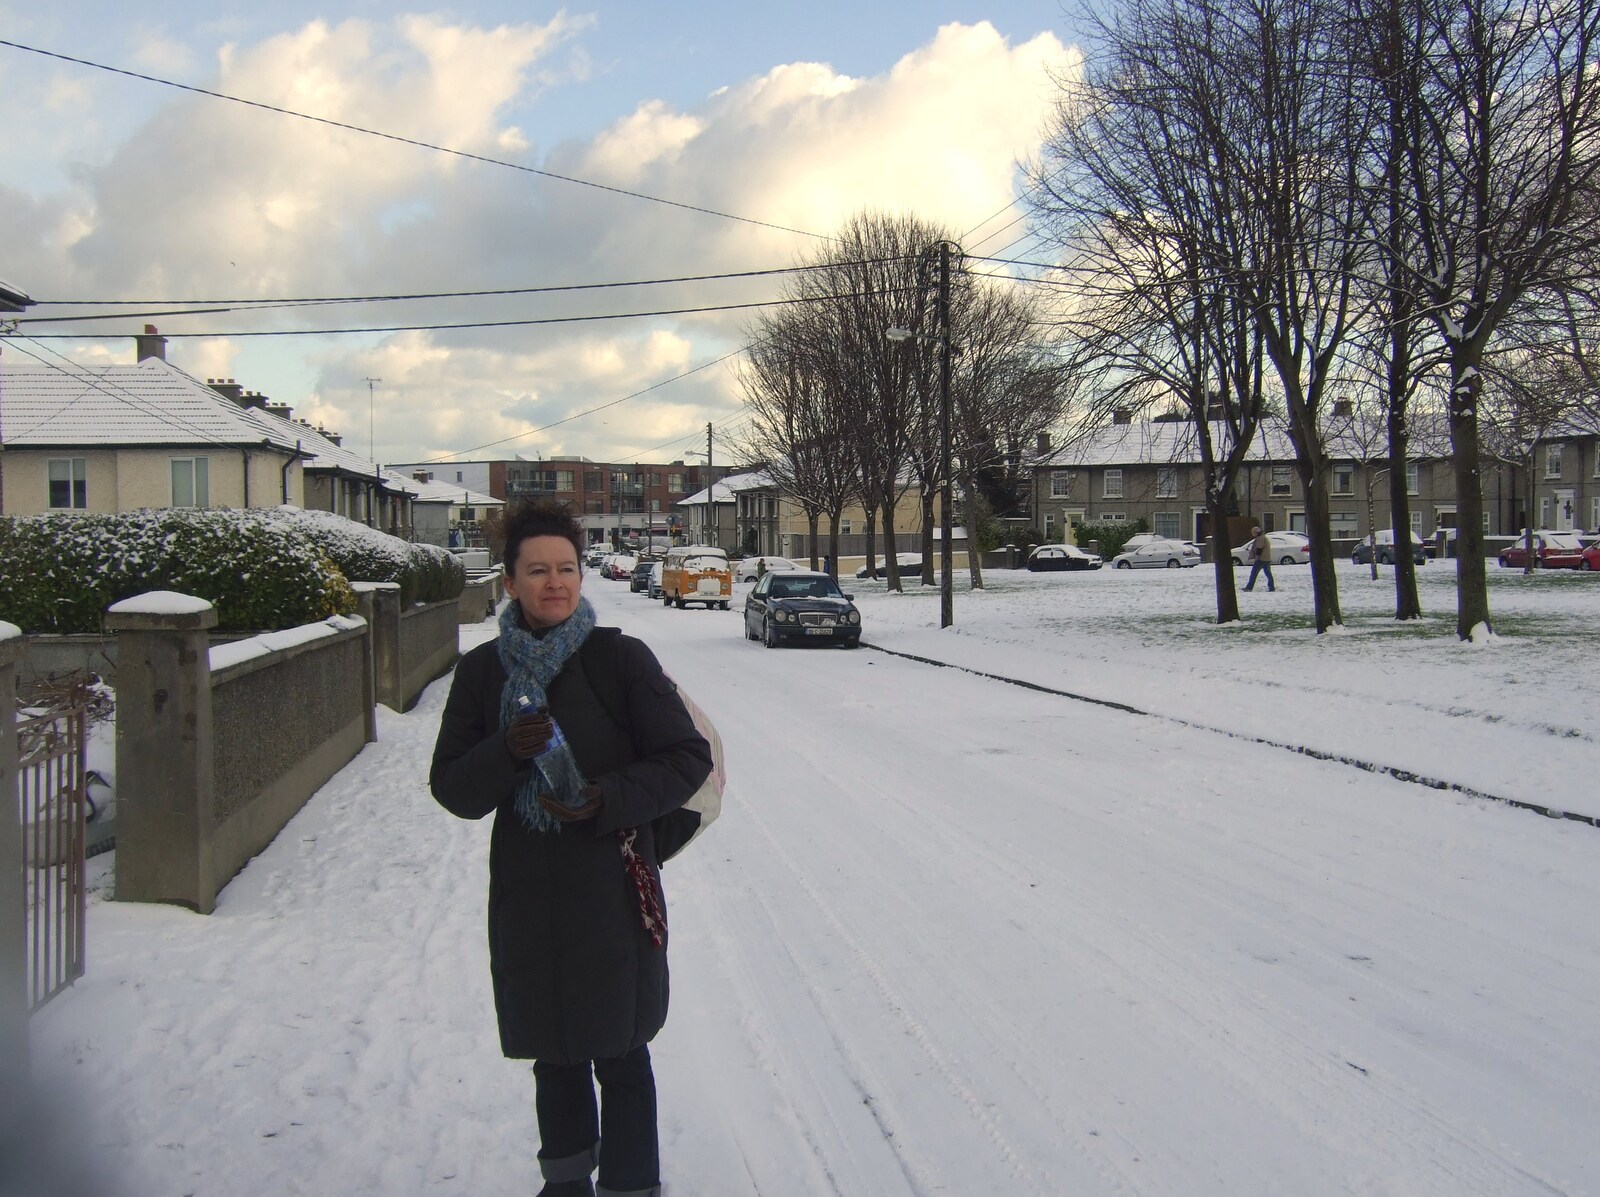 Evelyn on a snowy street from Fred in Monkstown, County Dublin, Ireland - 2nd February 2010